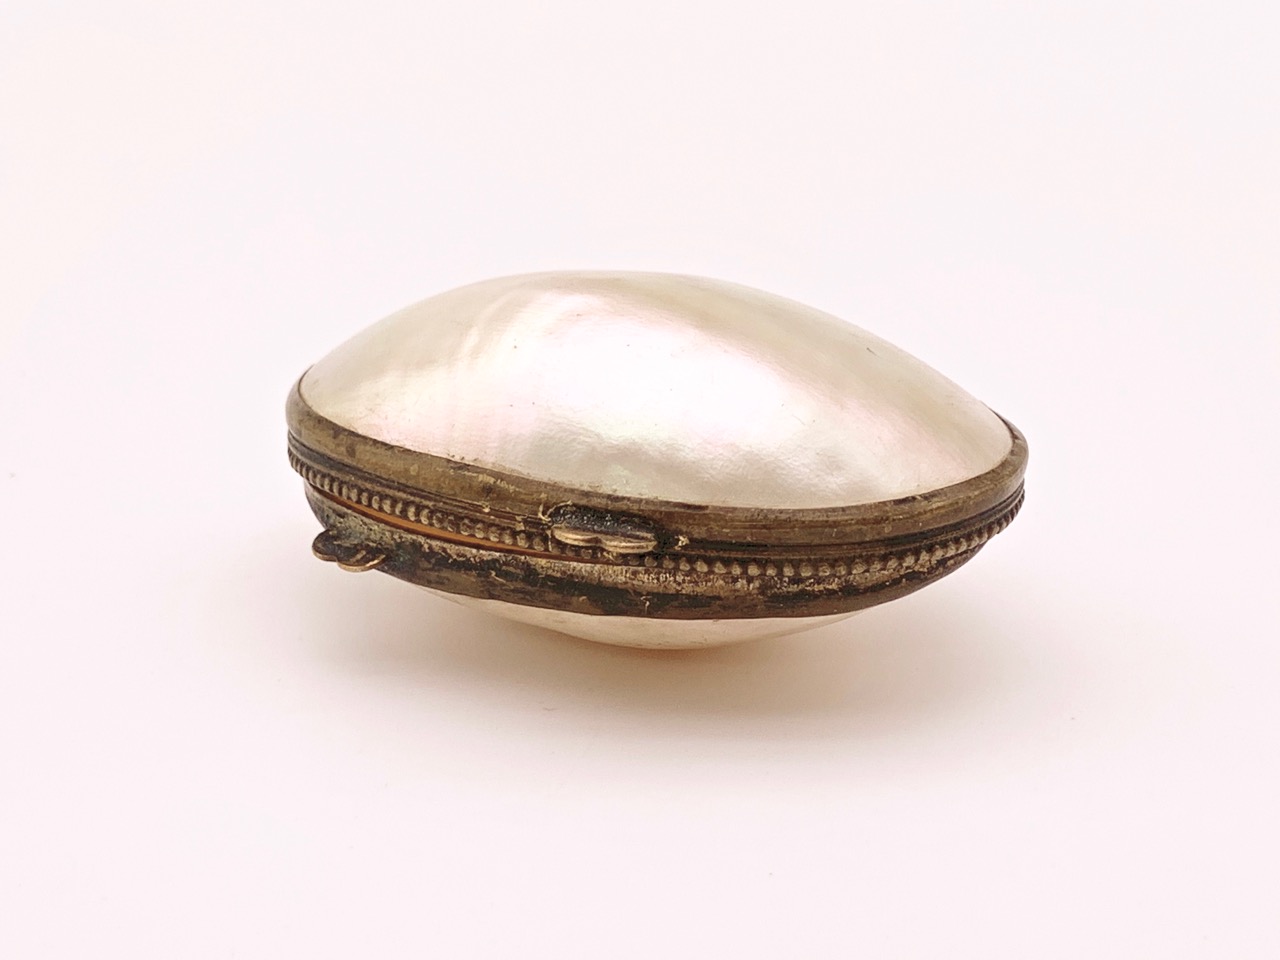 A Victorian shell coin purse, 5.5 x 4 cm - Image 2 of 2